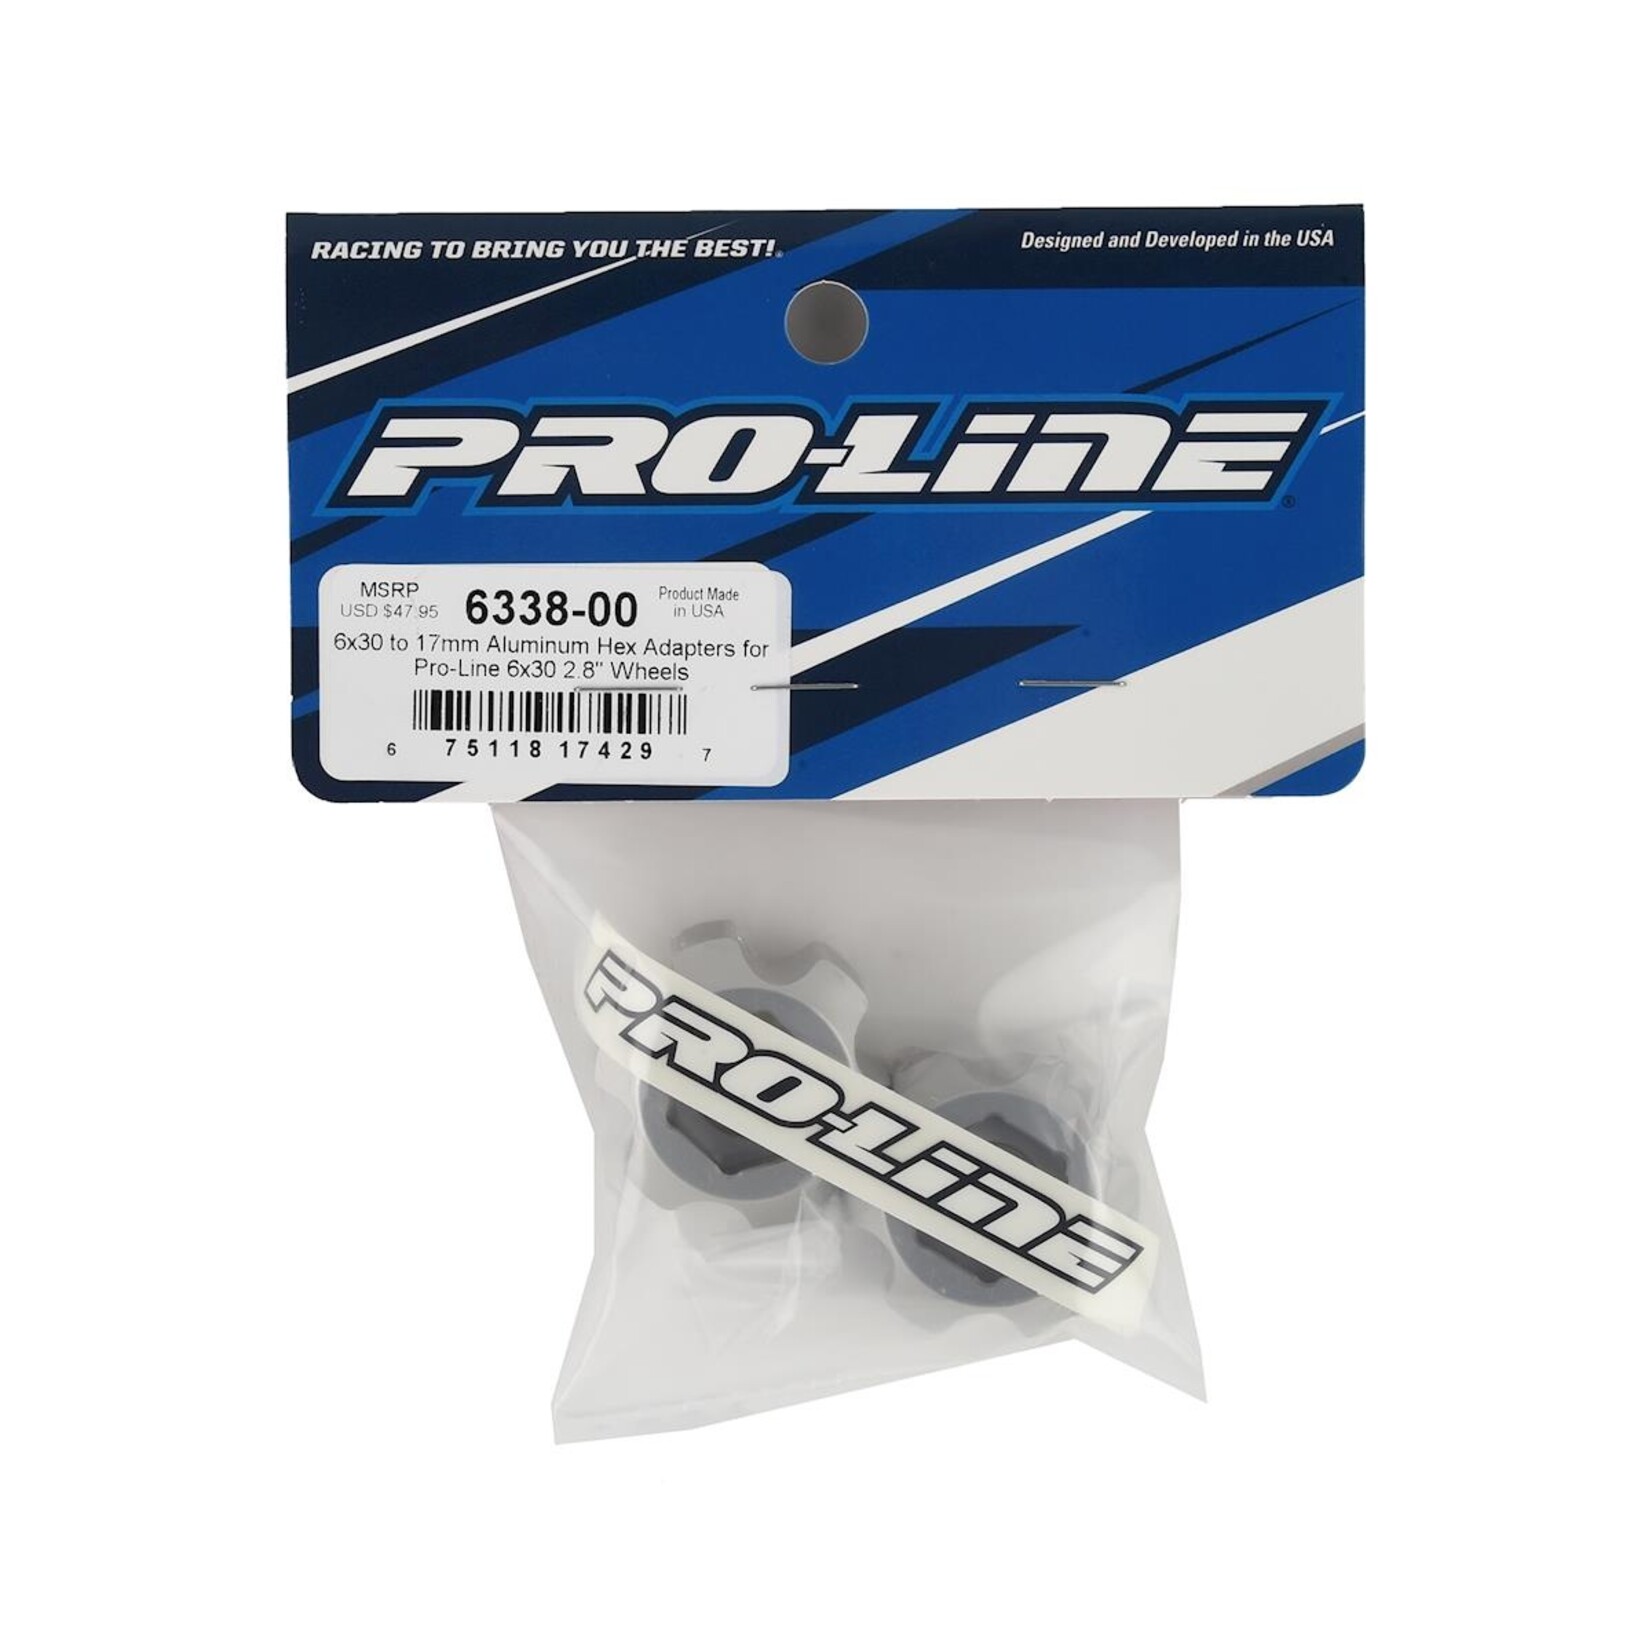 Pro-Line Pro-Line 6x30 to 17mm Aluminum Hex Adapters (2) #6338-00